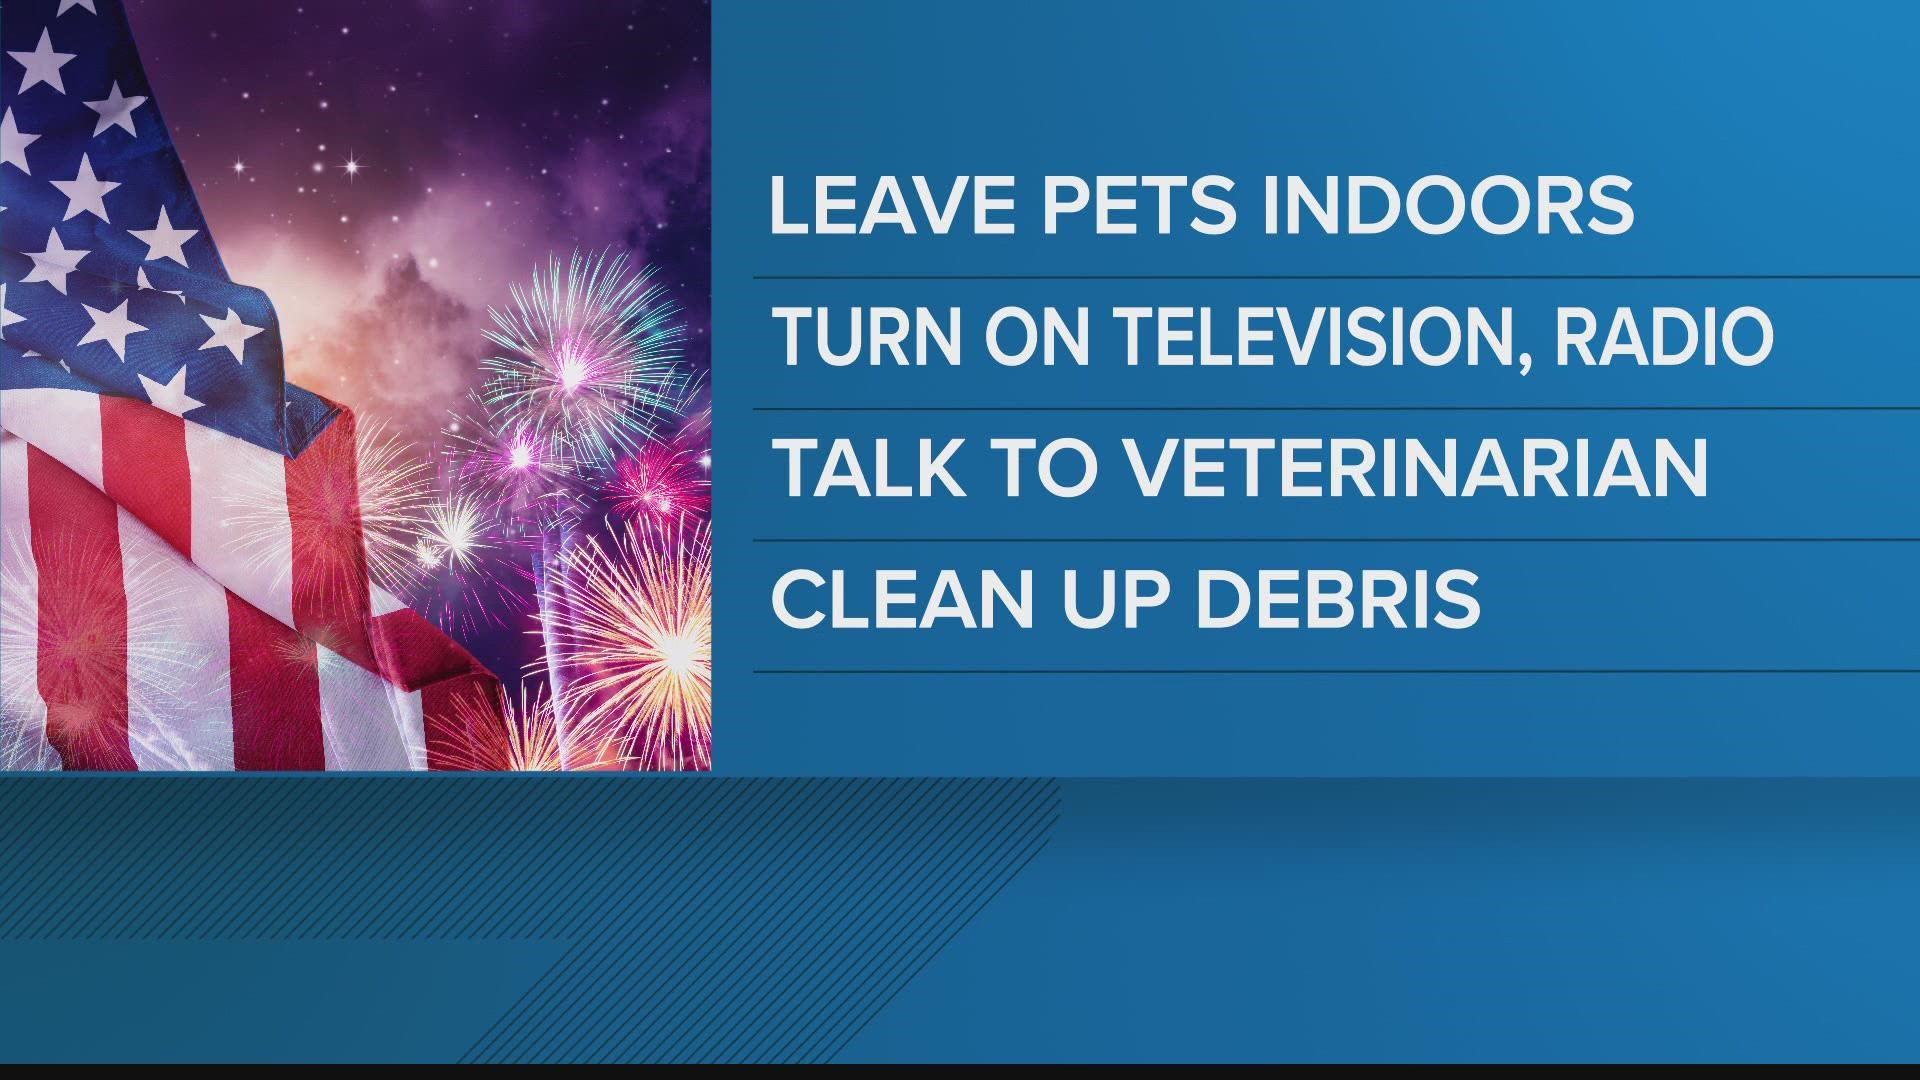 The humane society recommends leaving your animals indoors.